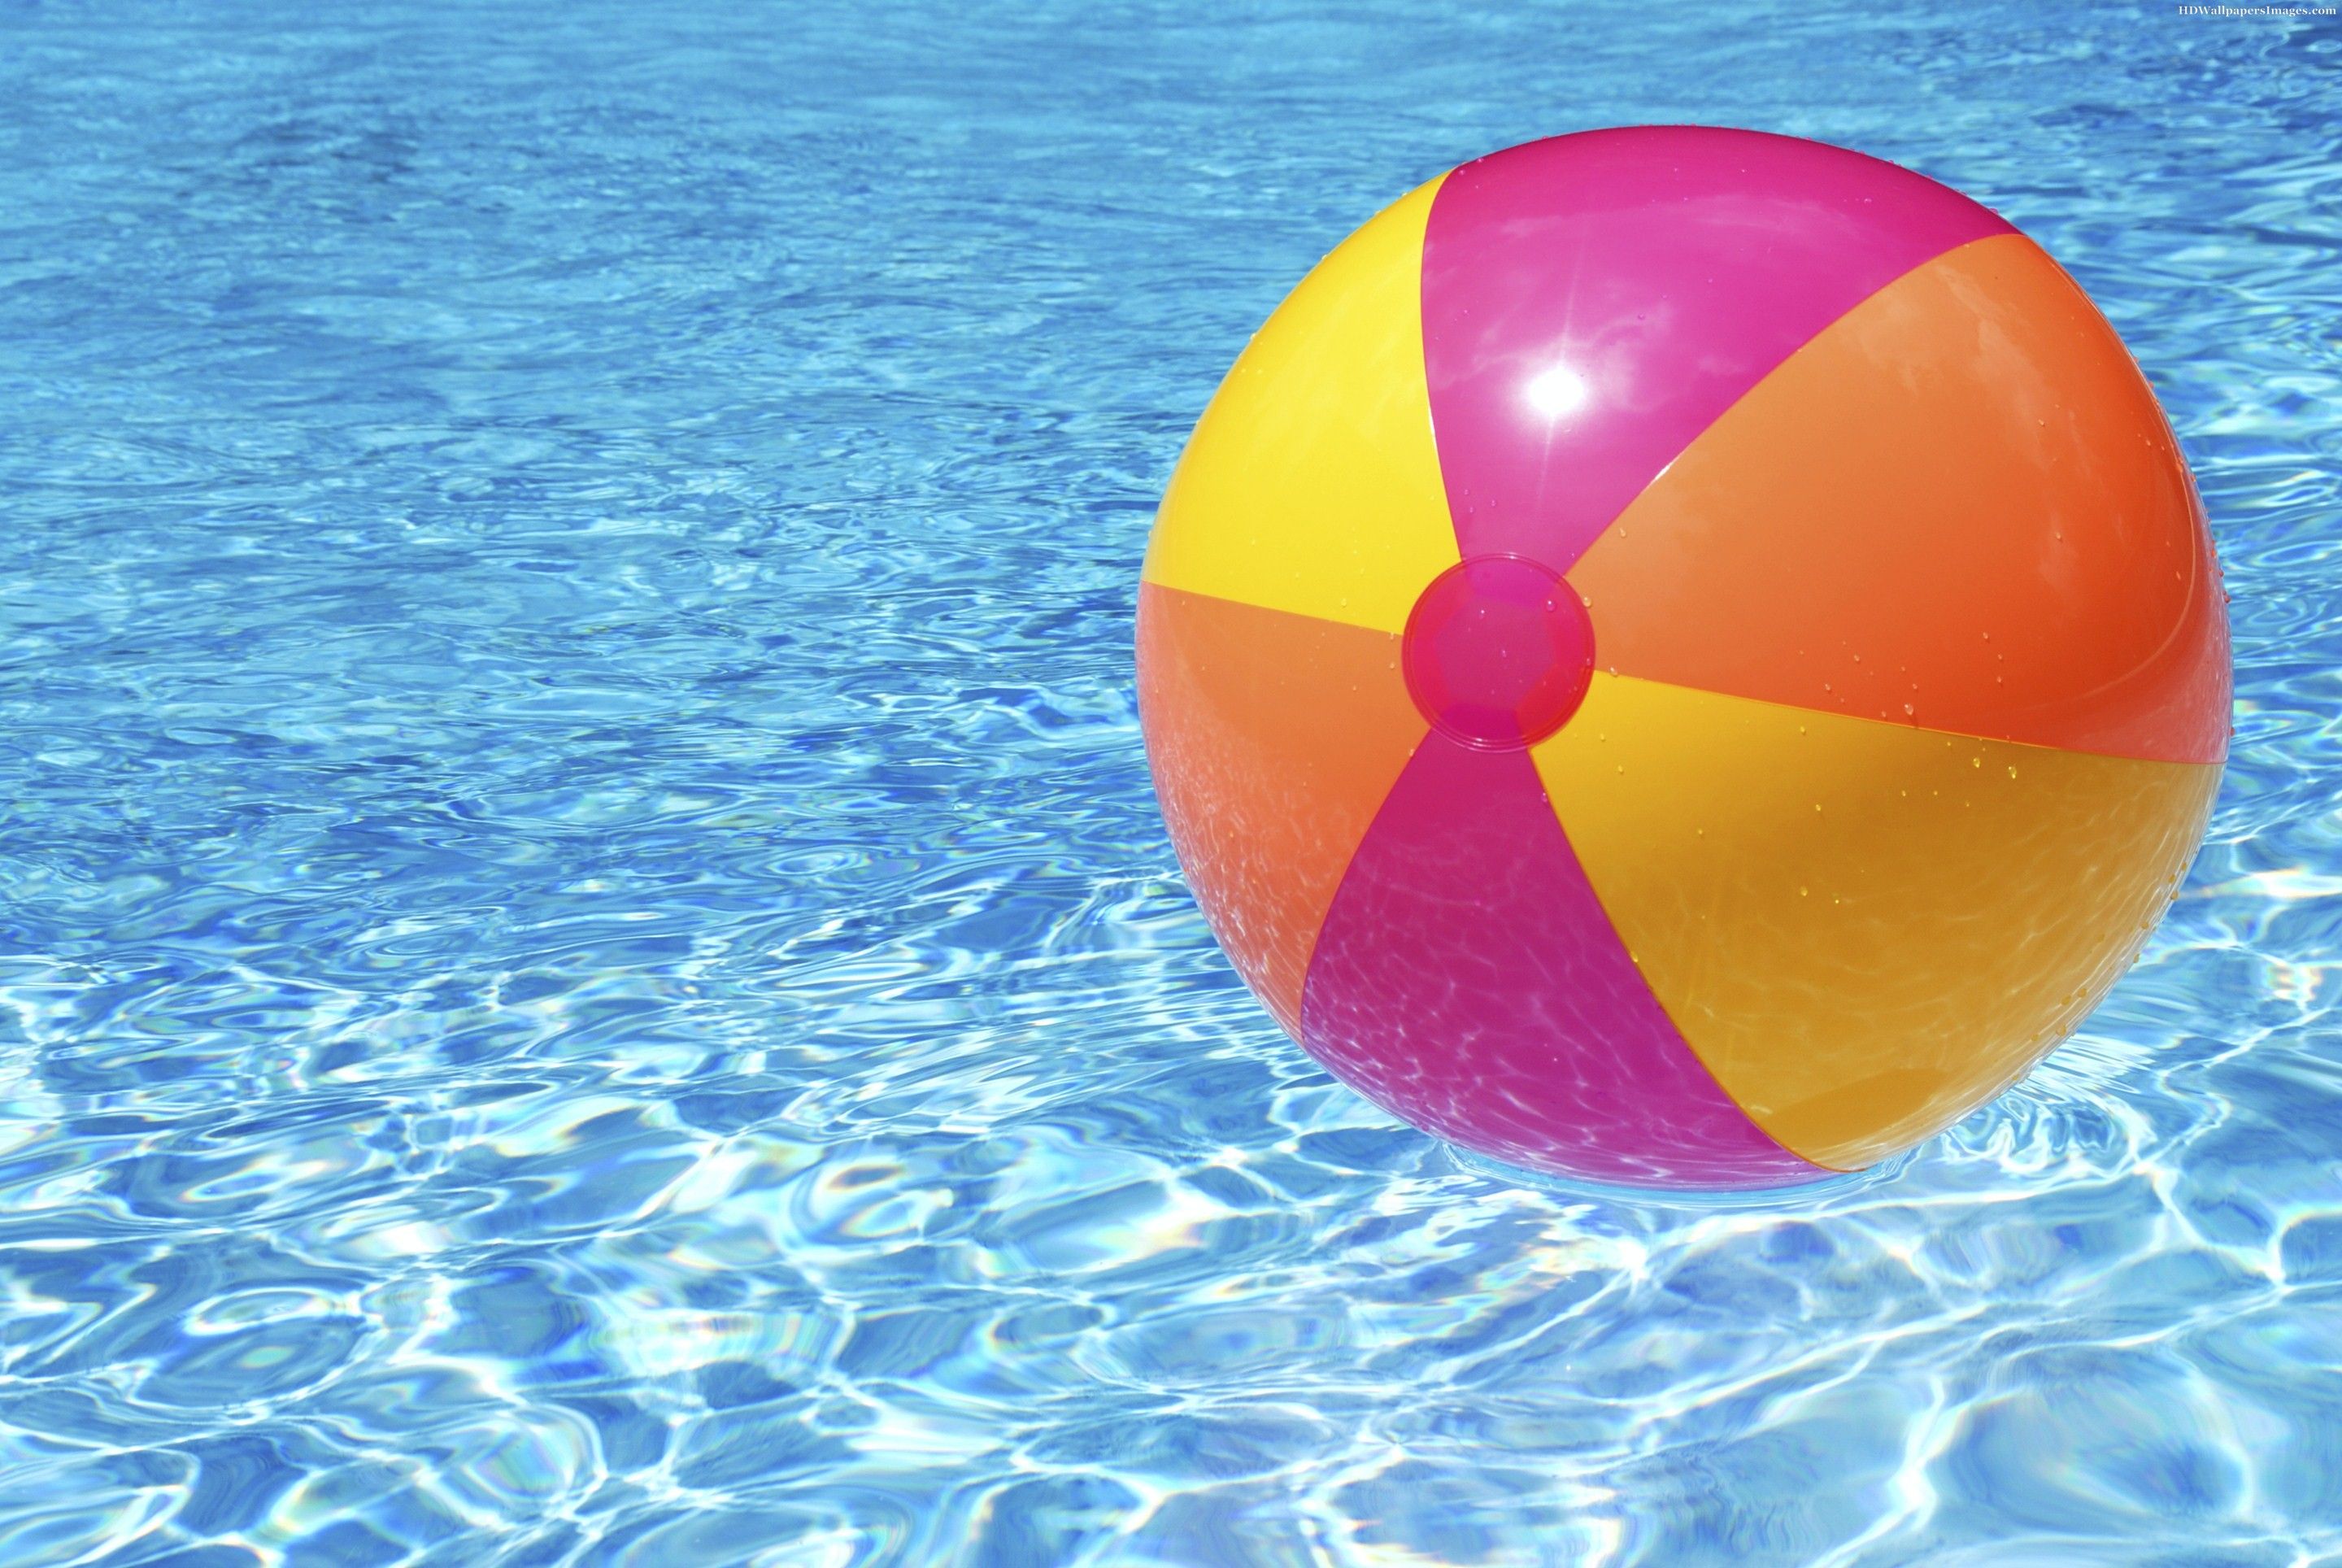 Beach Ball Floating On Water Image HD Wallpaper